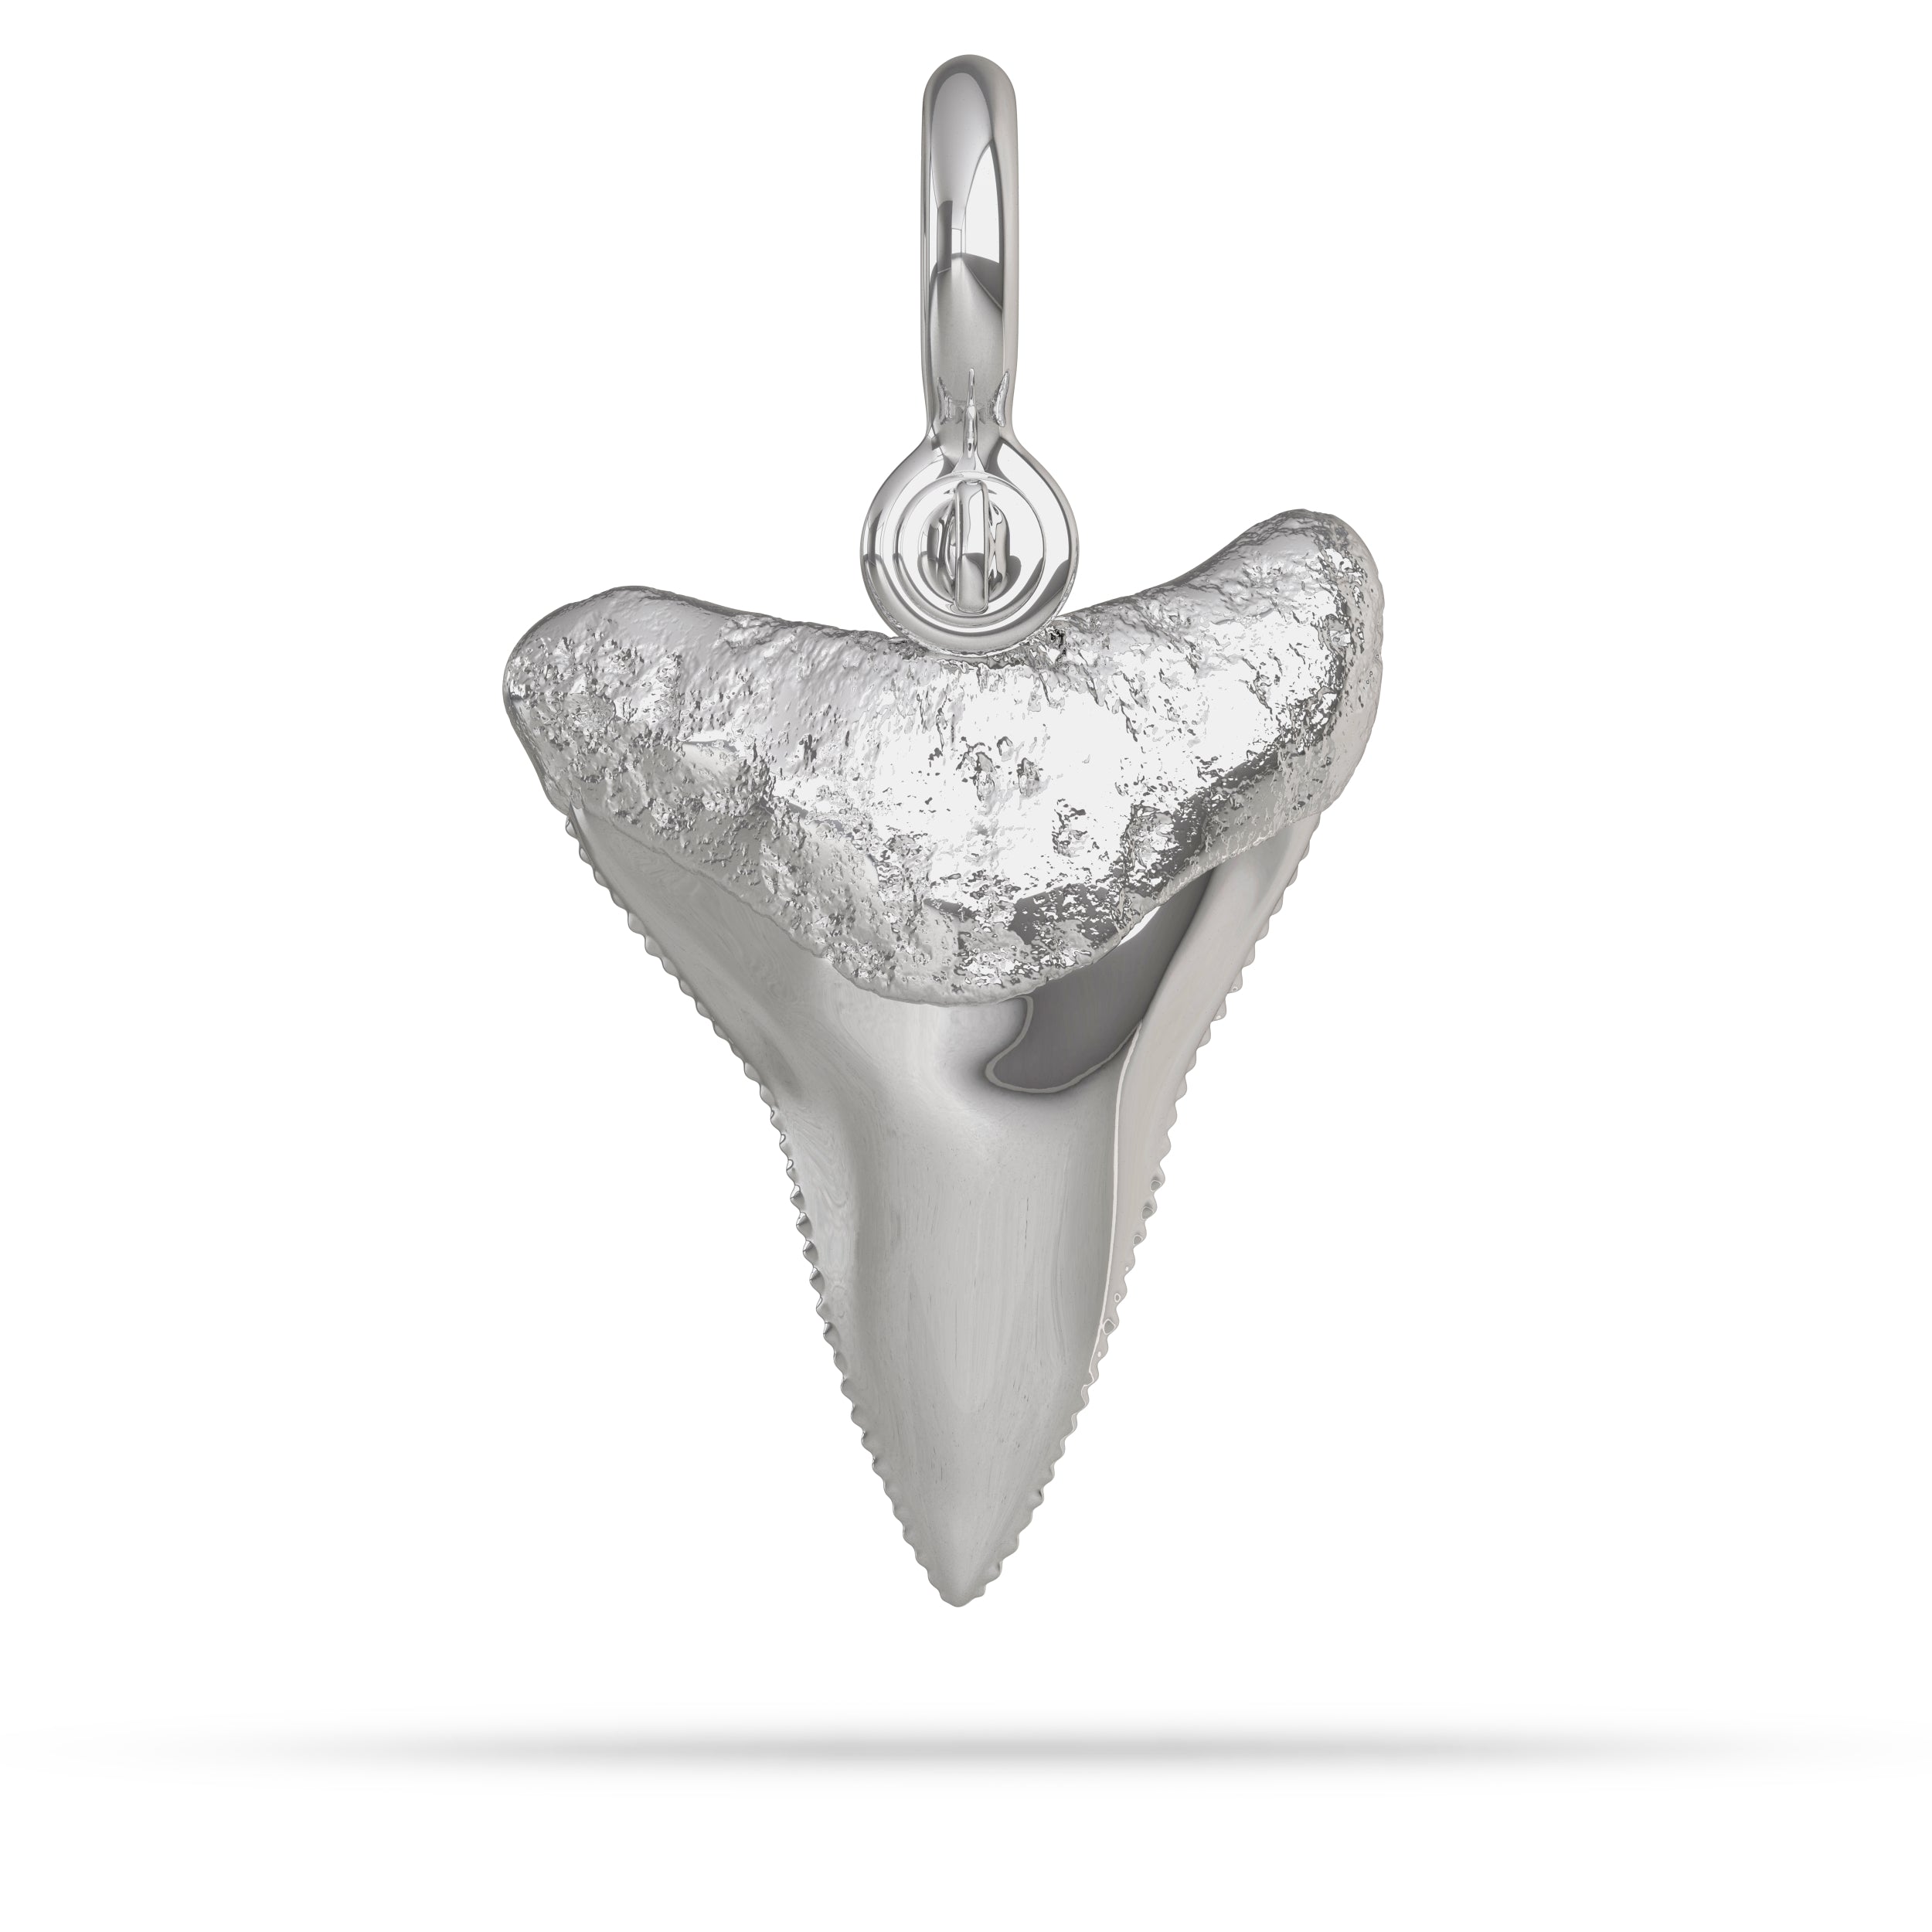 Great White Shark Tooth Pendant I Nautical Treasure Jewelry Sterling Silver / 28mm (Small) / 2D (shelled) by Nautical Treasure Jewelry